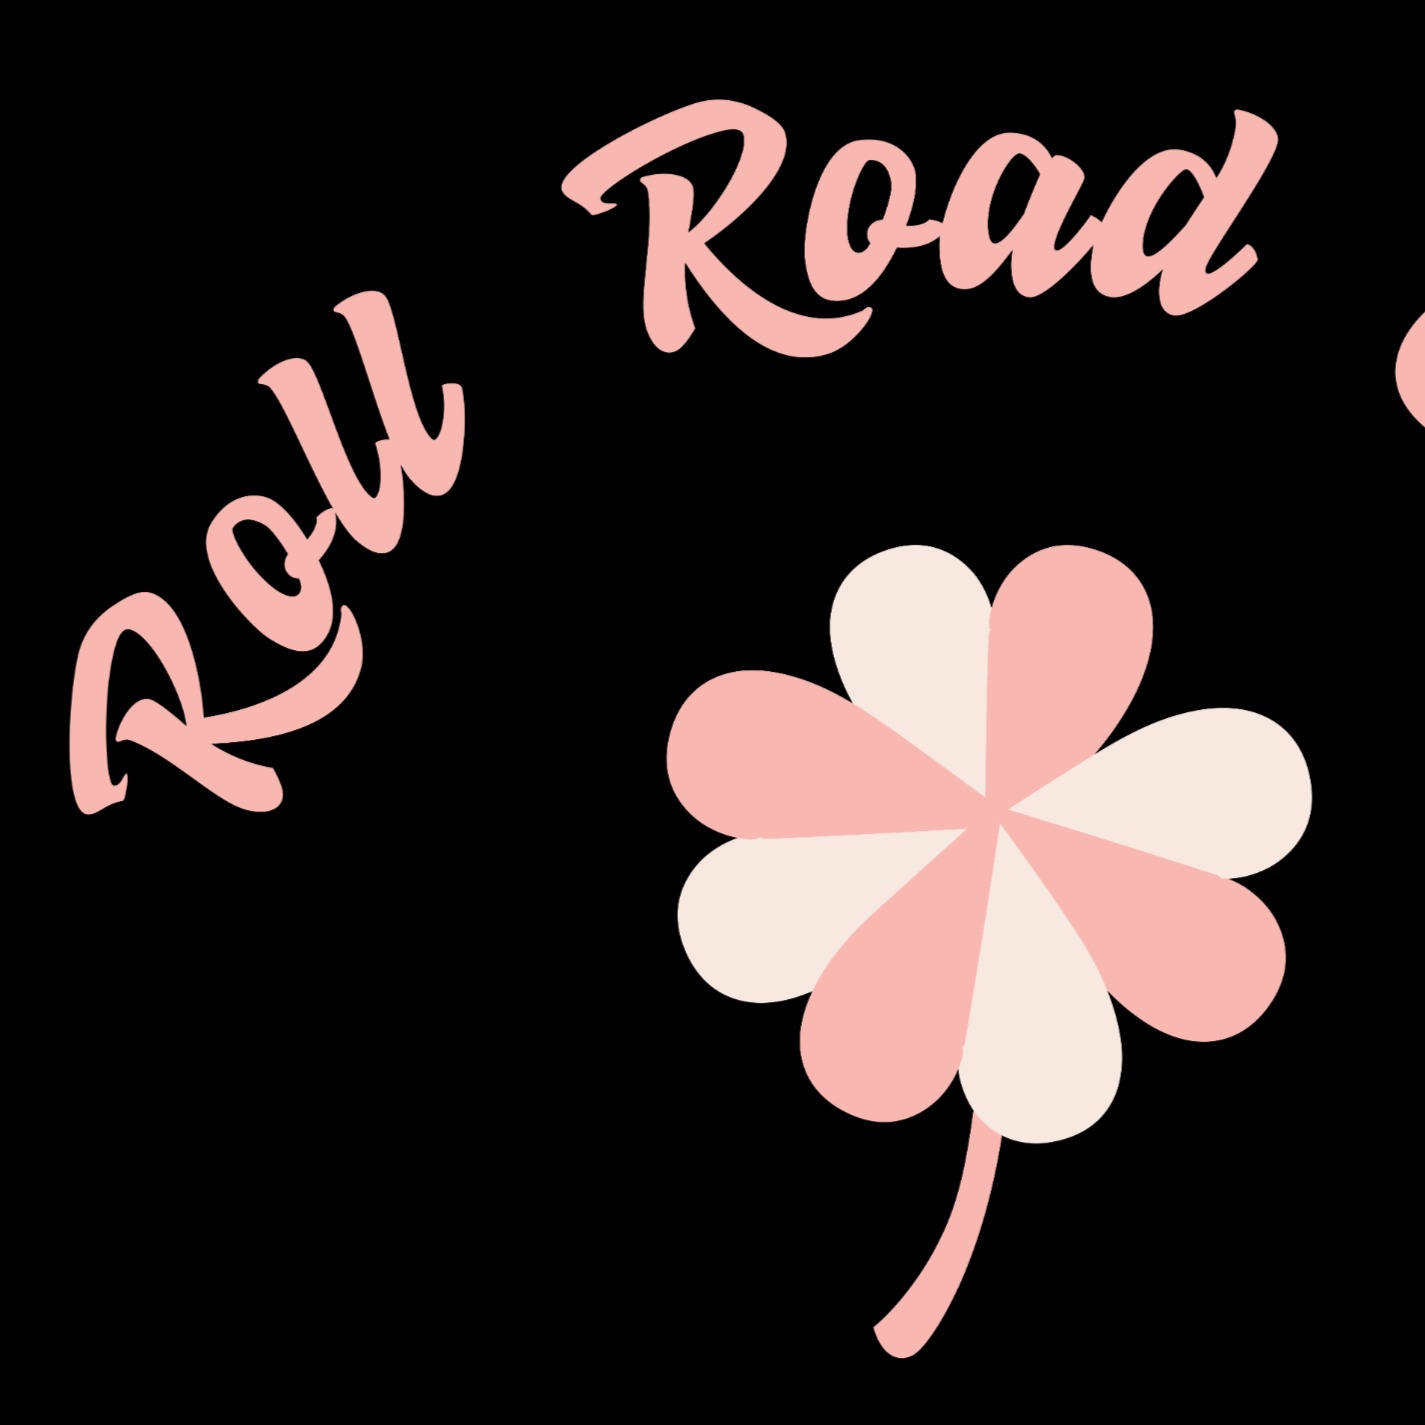 Roll Road Cake Limited